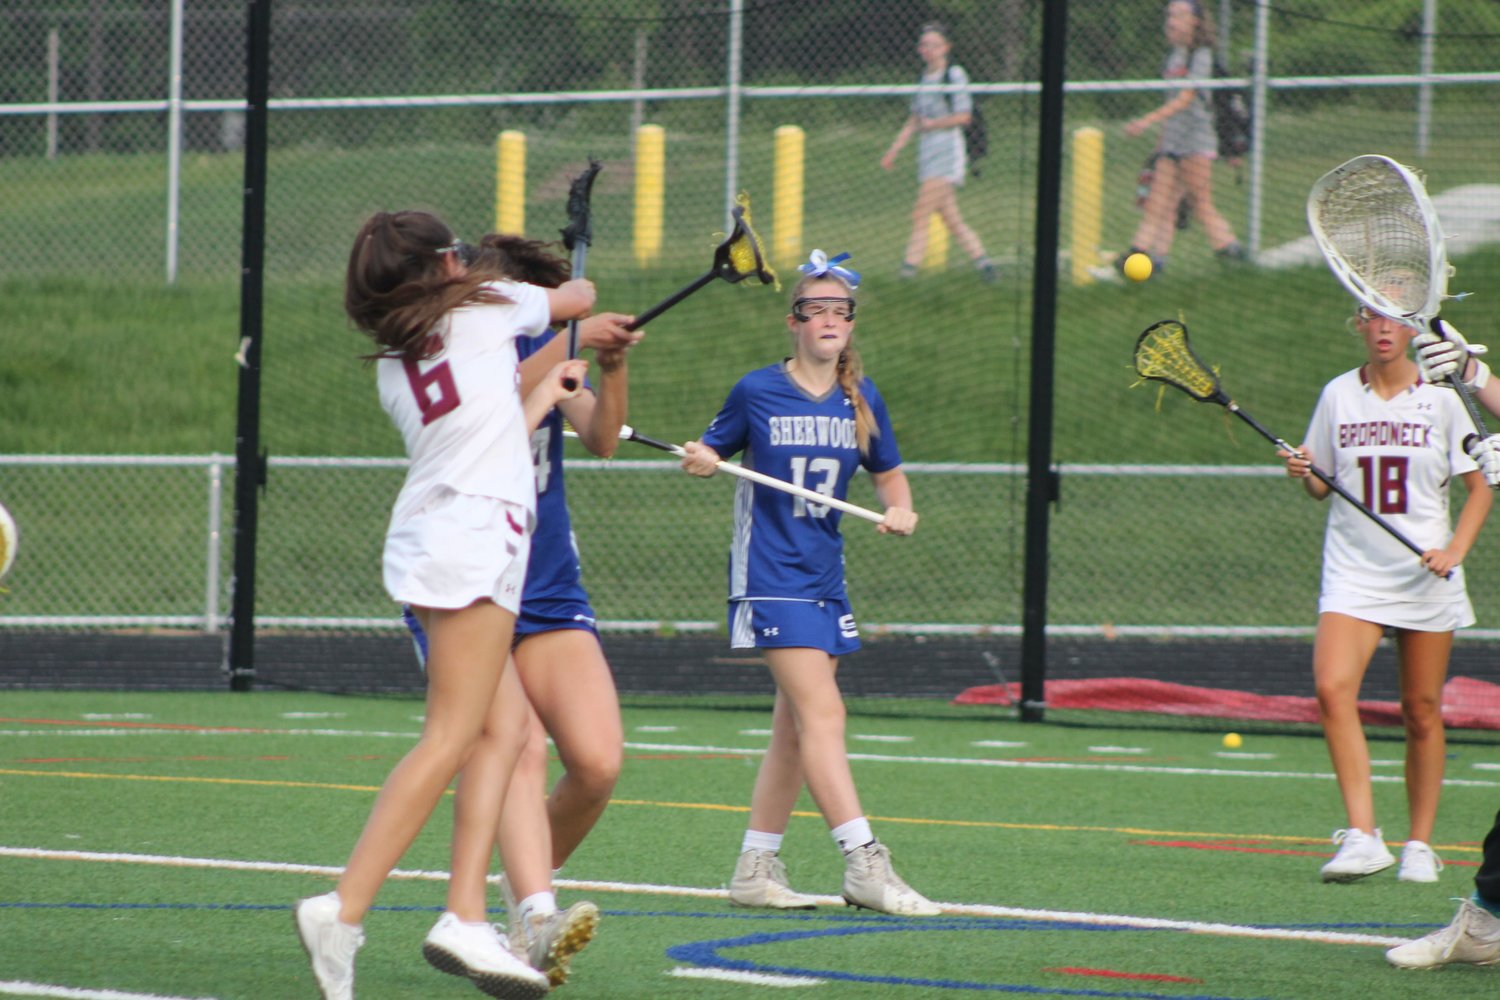 Lily Trout attempted a shot on goal during the state semifinals on May 20.